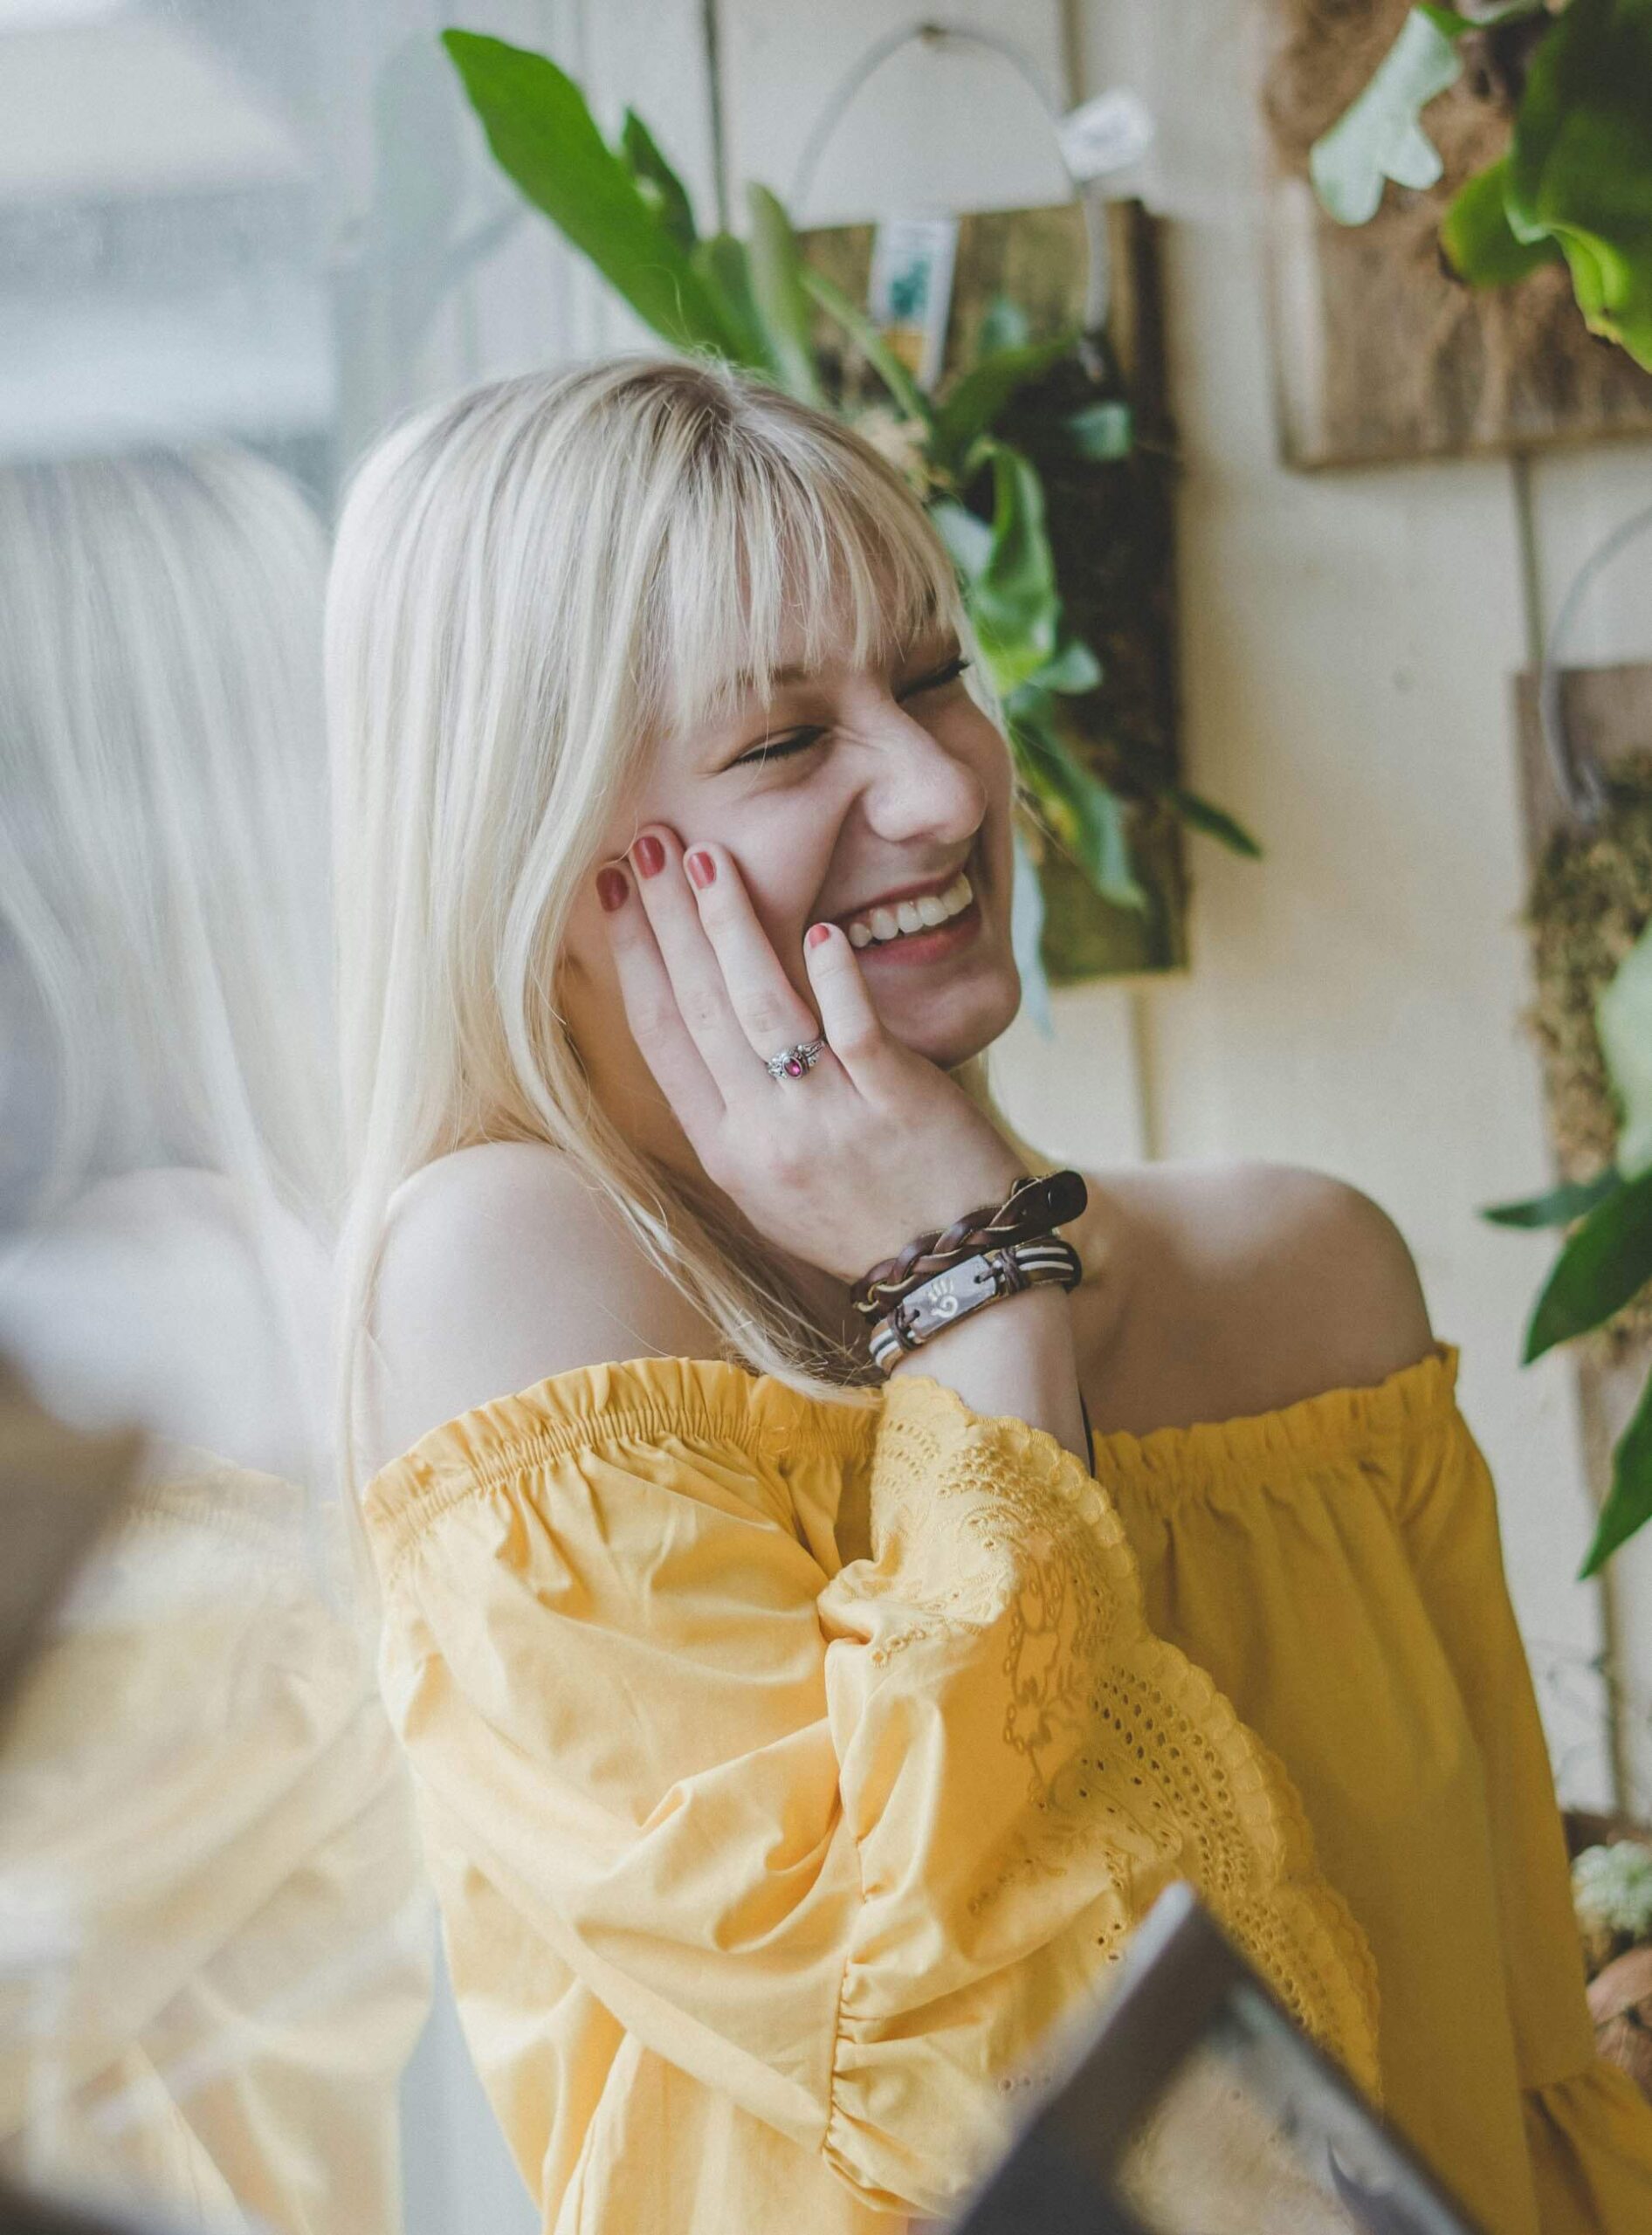 A young women smiling while holding cheek. If you want to discover anxiety coping strategies, get started with anxiety therapy in NYC, NY today. Our anxiety therapist are here to support you.